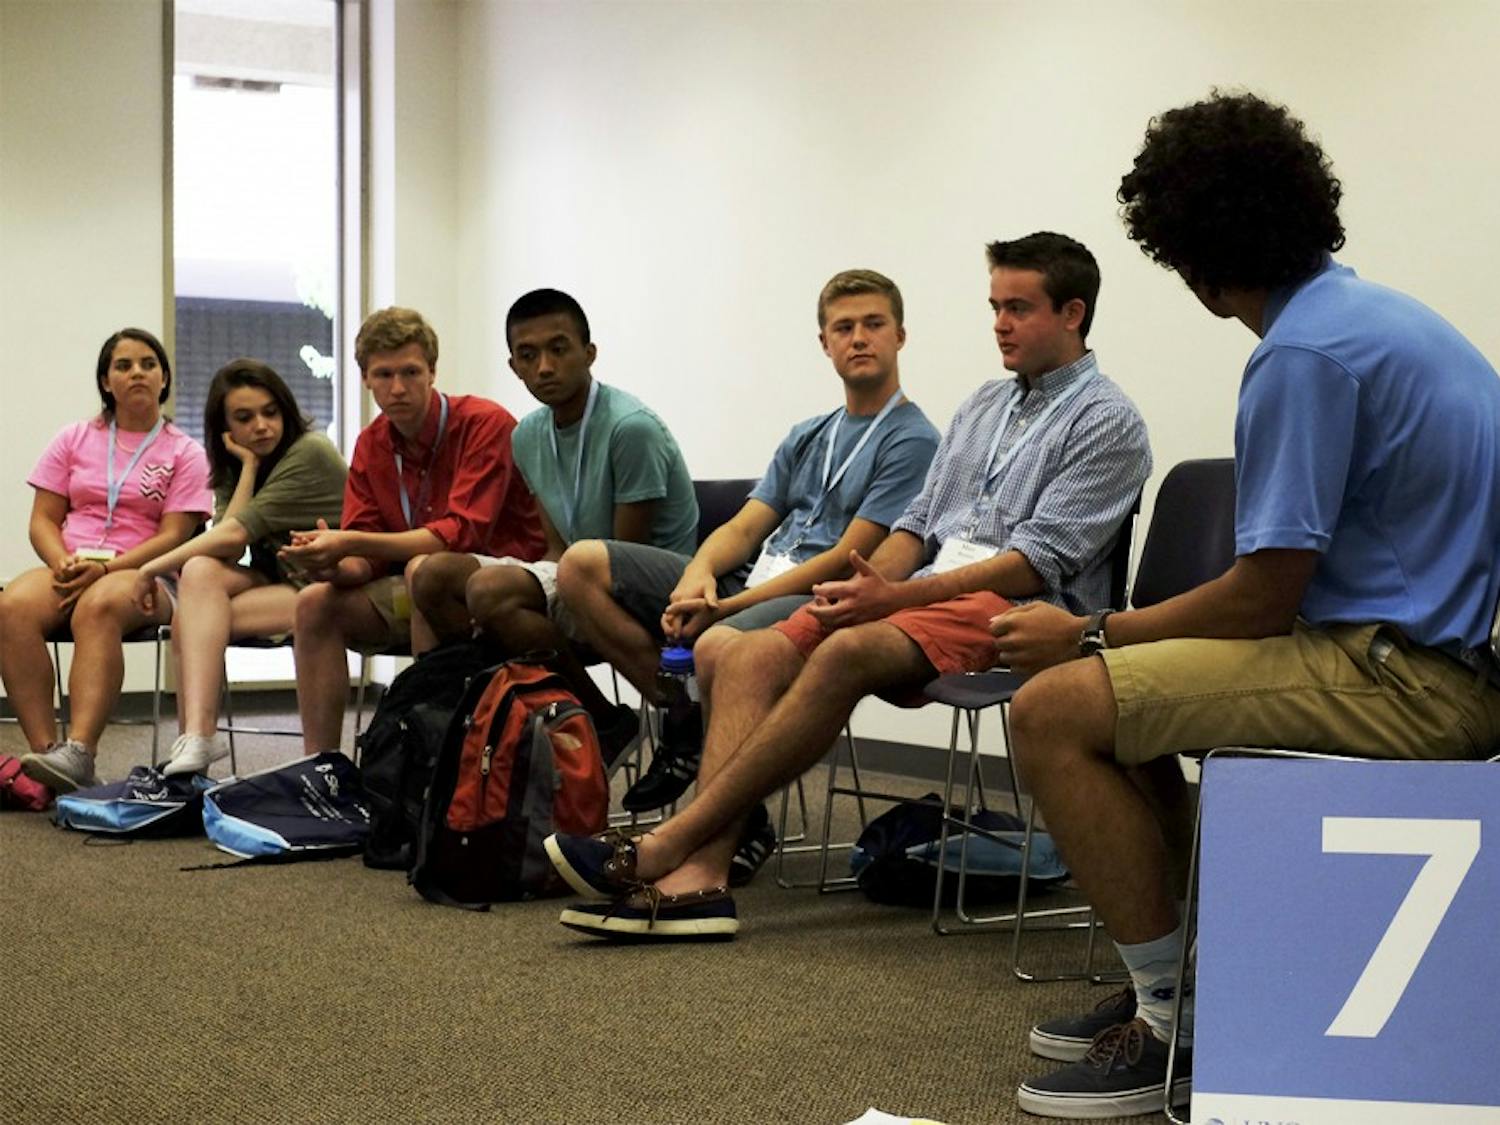 Parker Martin, an orientation leader, leads a discussion after a presentation on Monday.